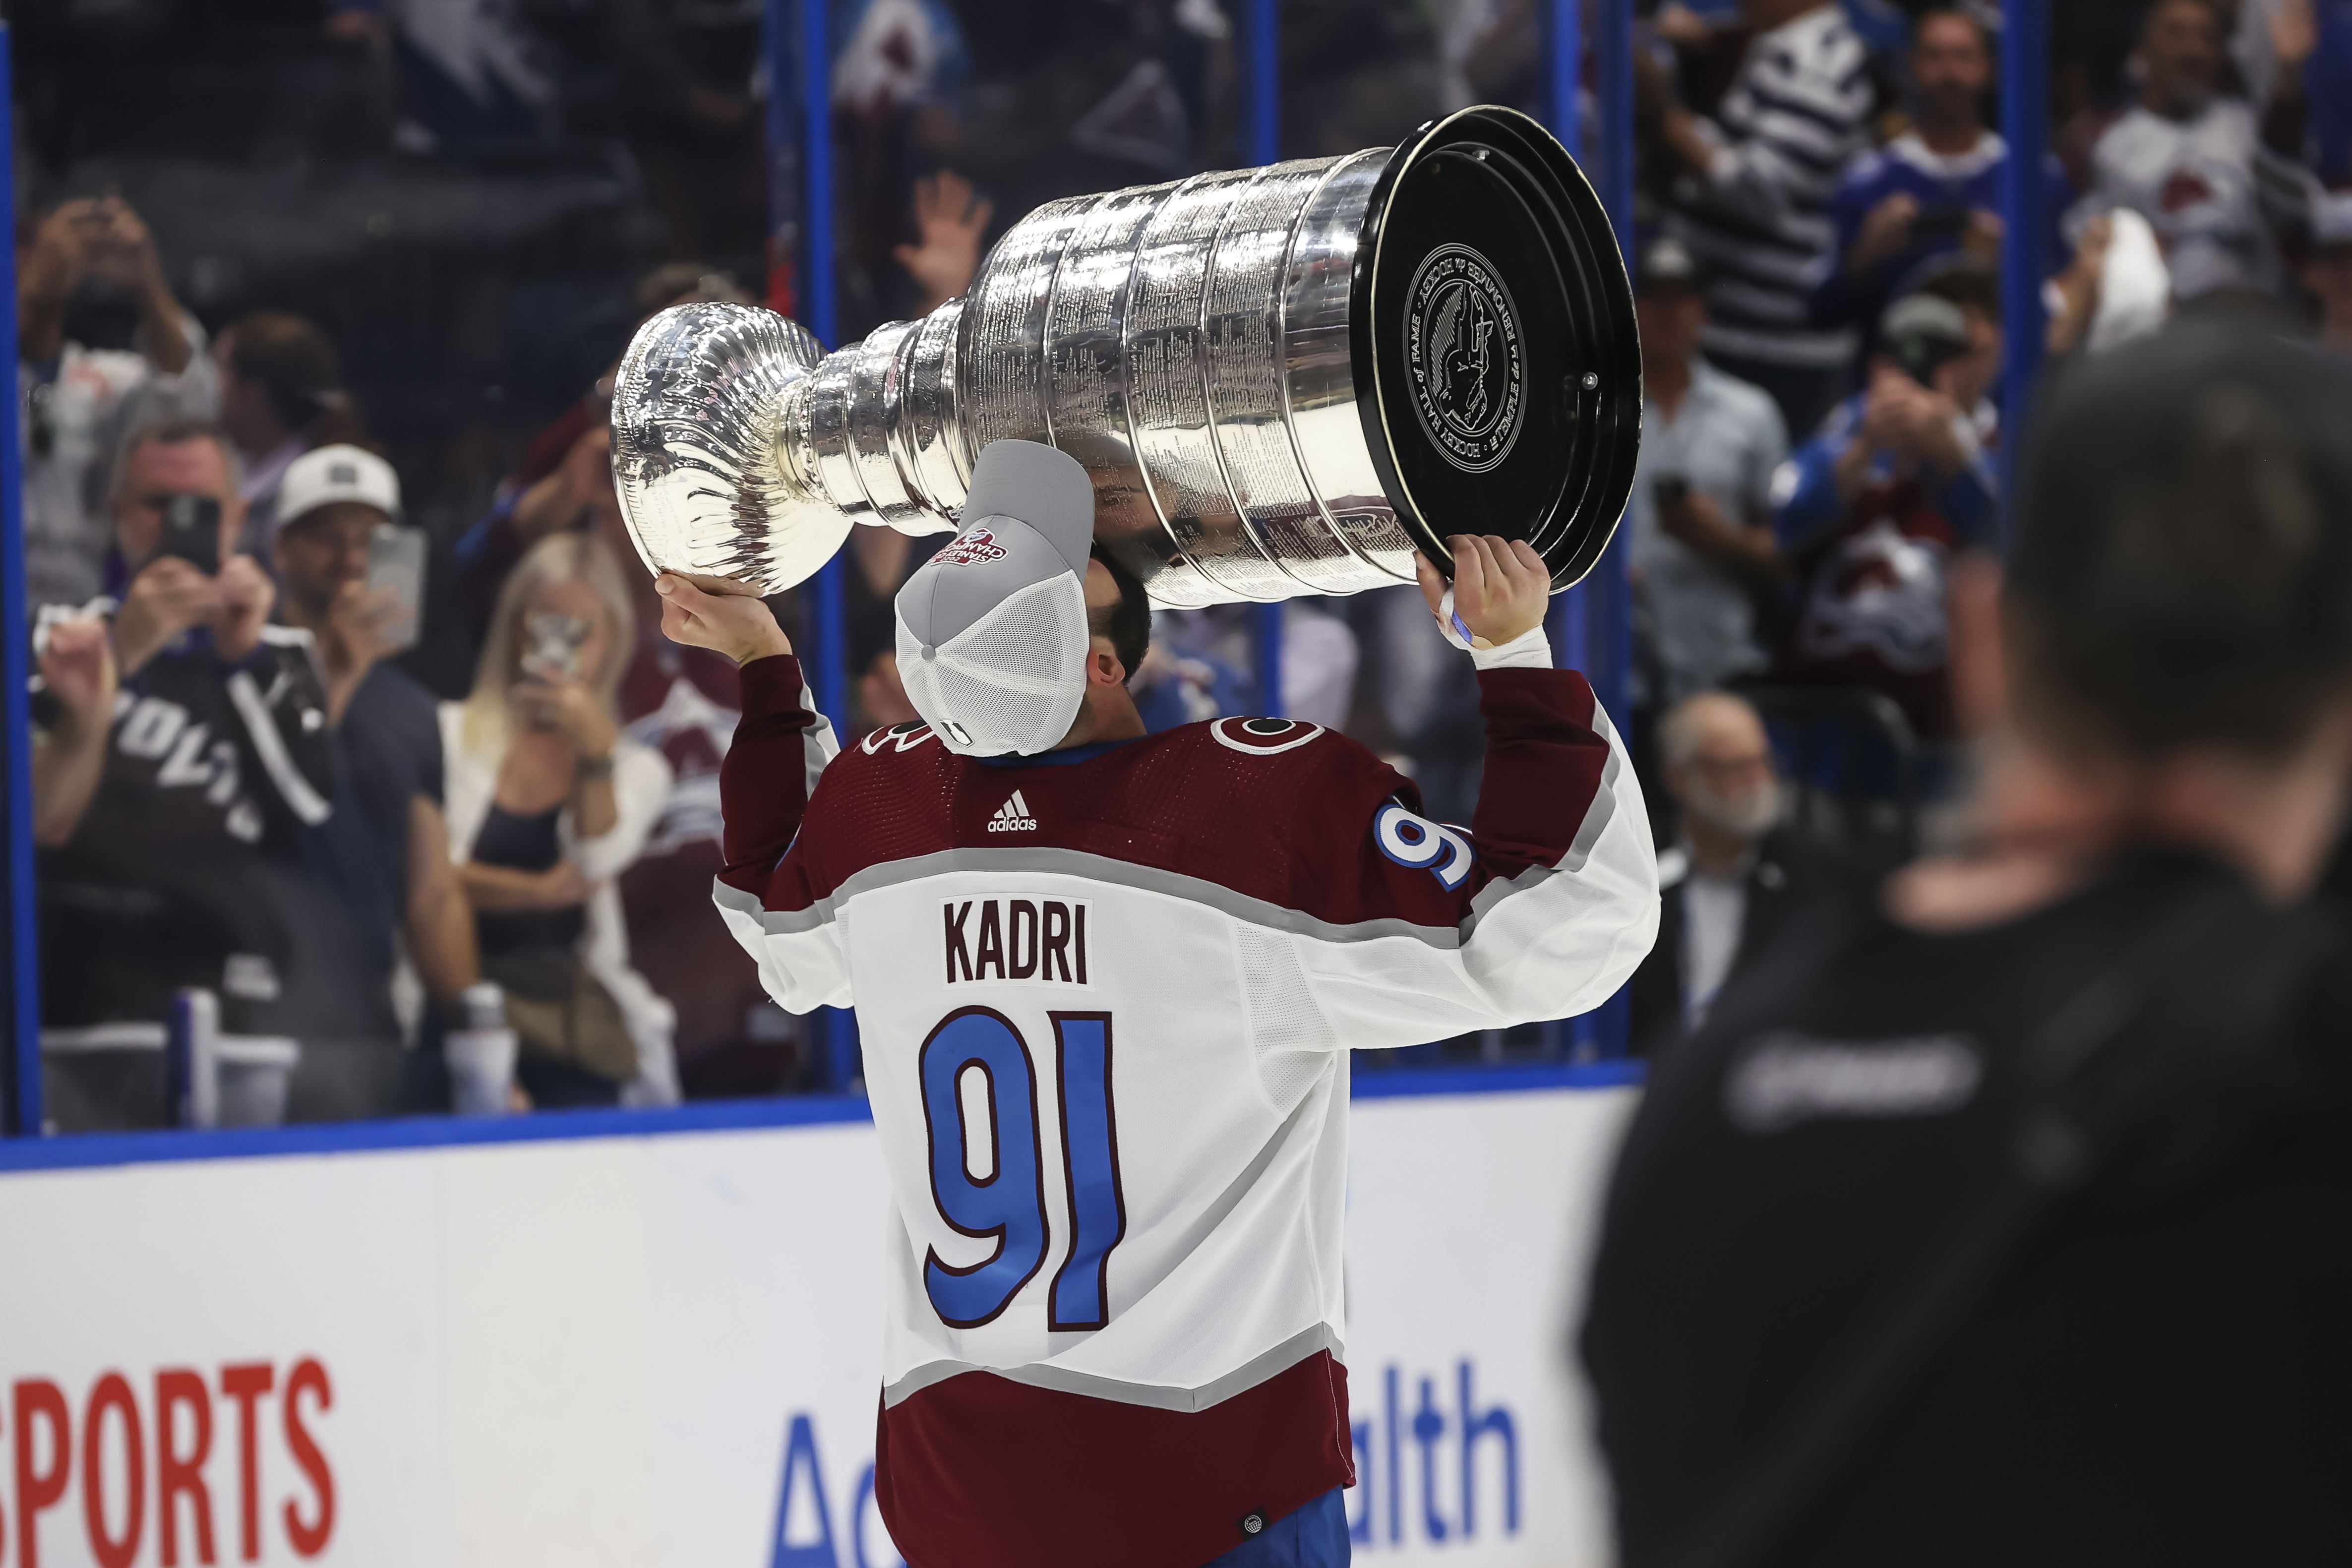 Nazem Kadri #91 and the Colorado Avalanche celebrate winning the Stanley Cup after Game Six.